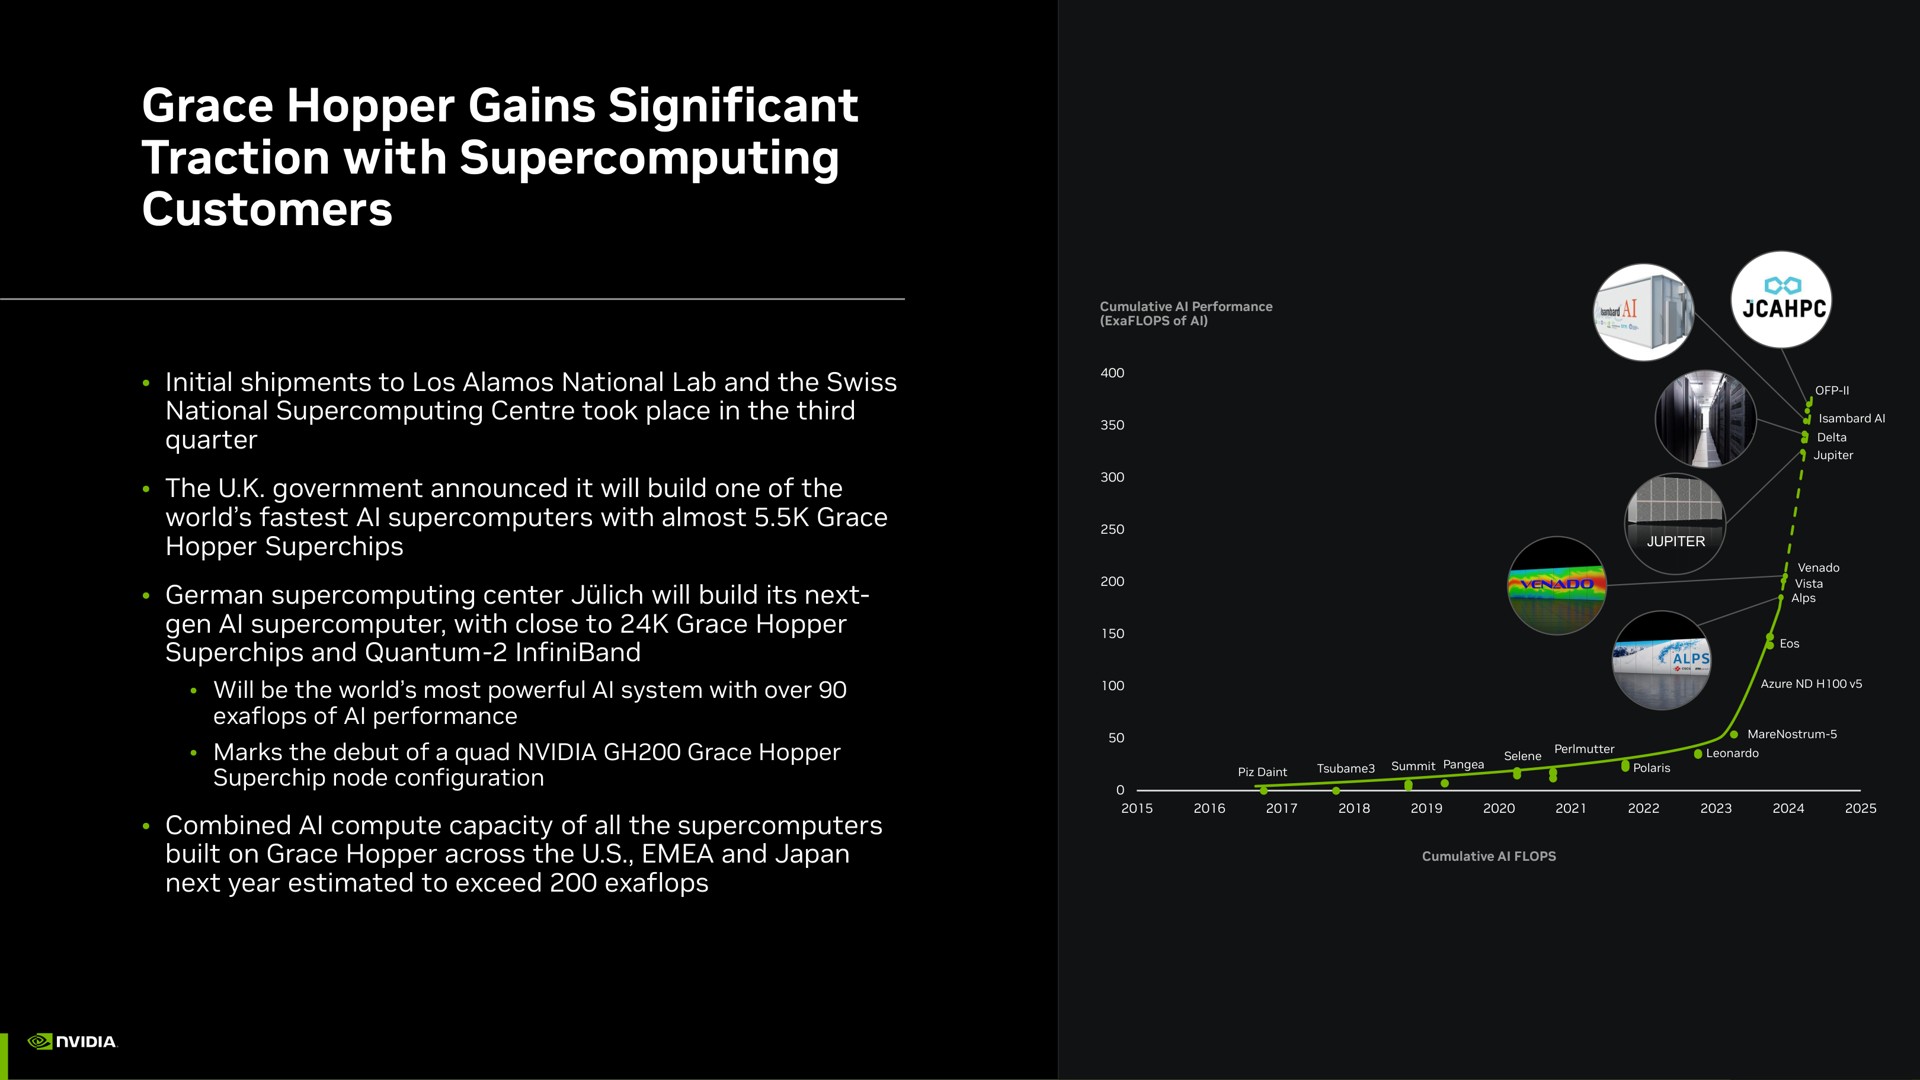 grace hopper gains significant traction with customers | NVIDIA